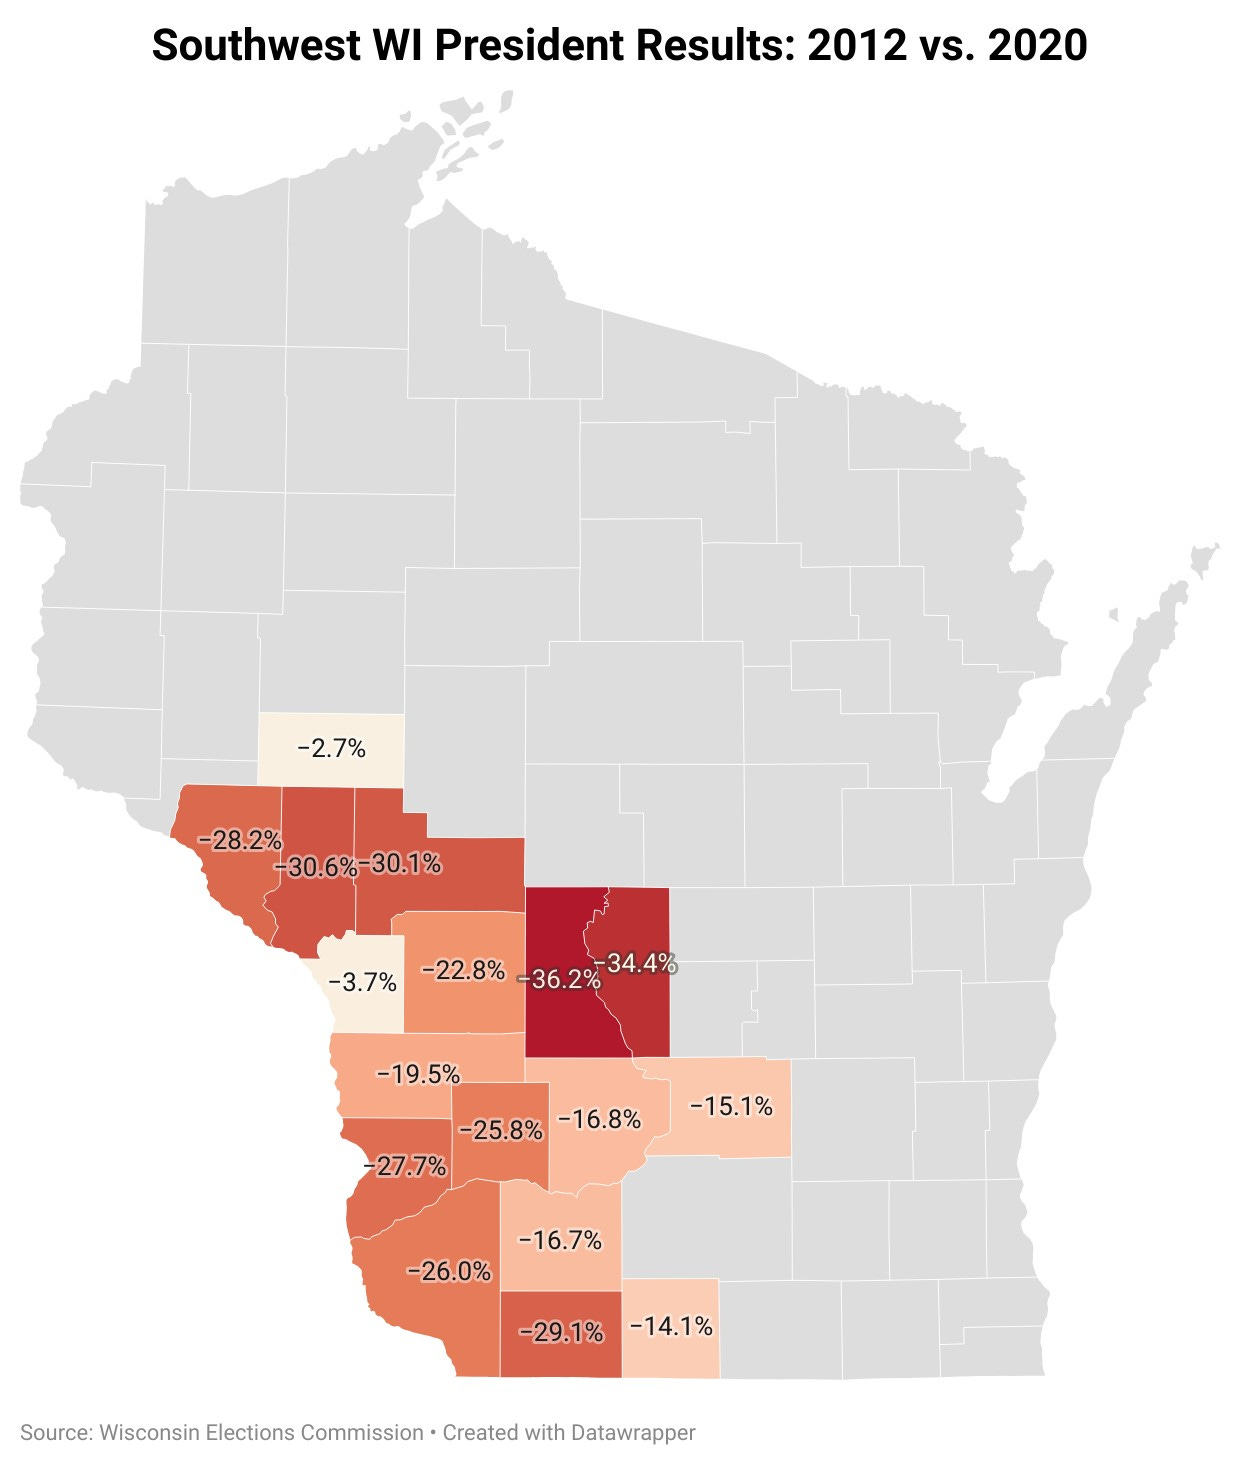 A map of the state of wisconsin

Description automatically generated